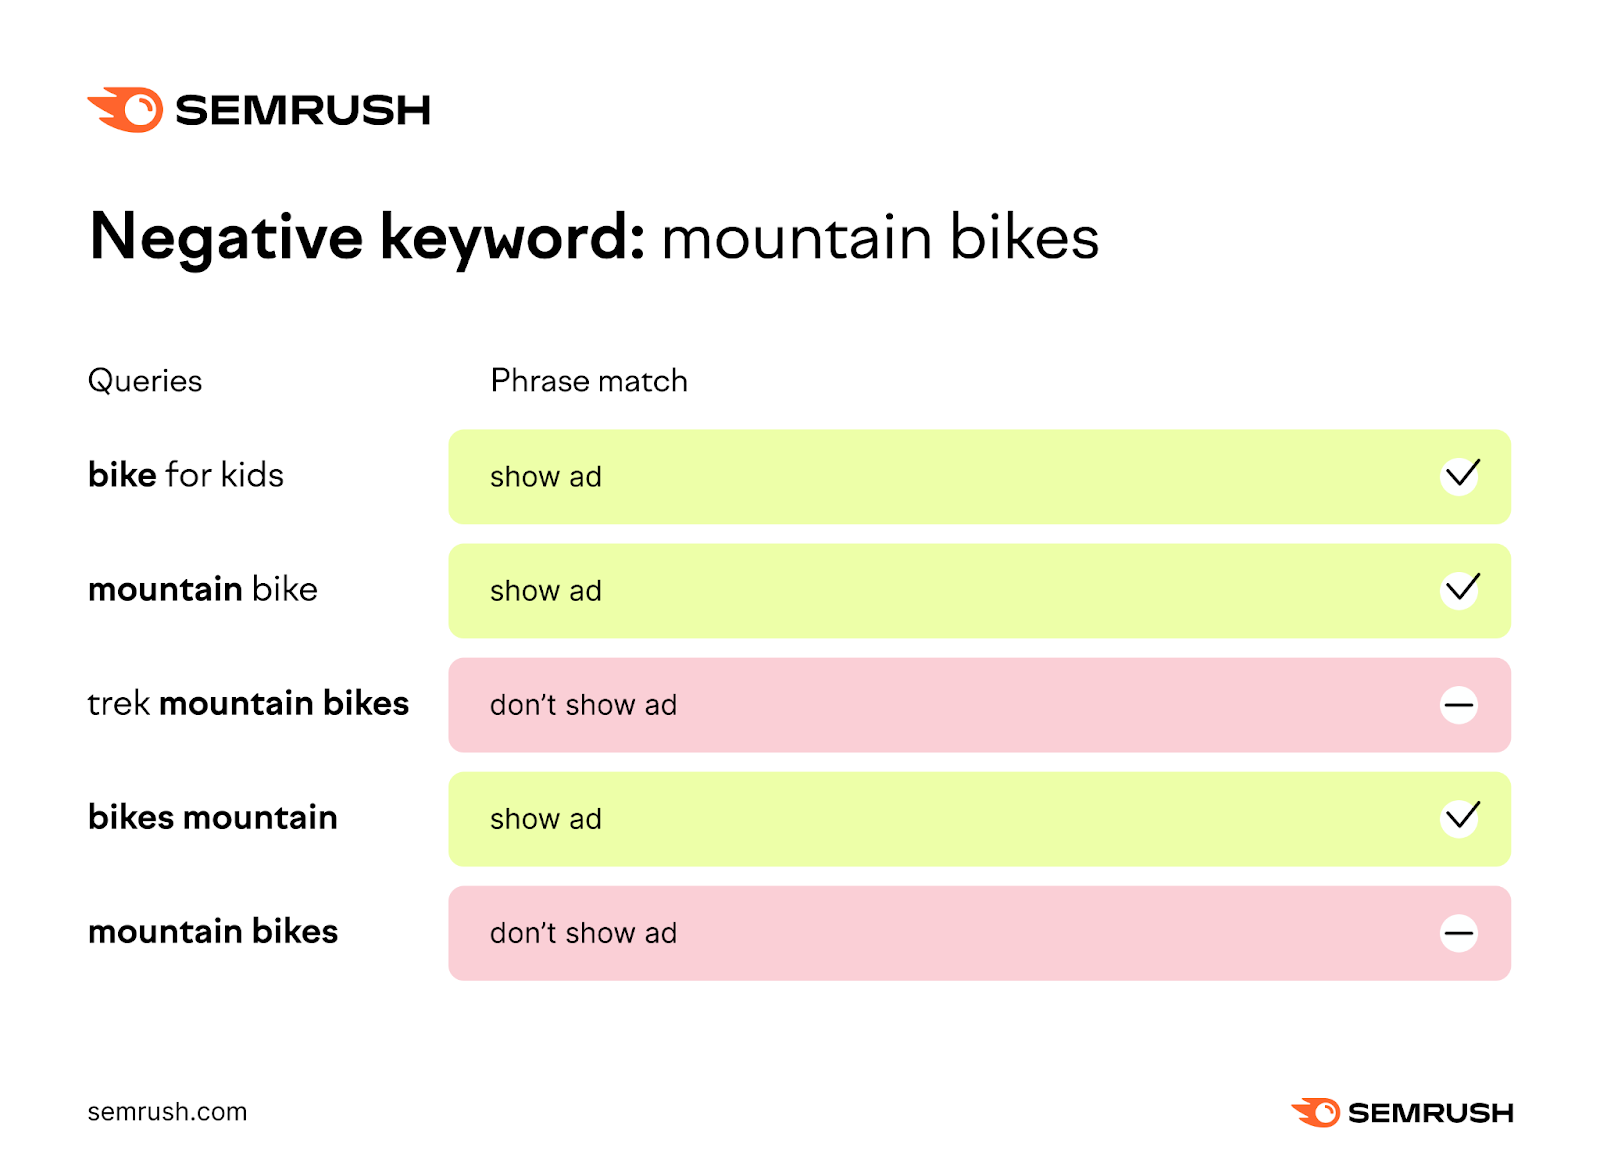 a visual example of "negative keyword: mountain bikes" showing examples for different queries and phrase matches